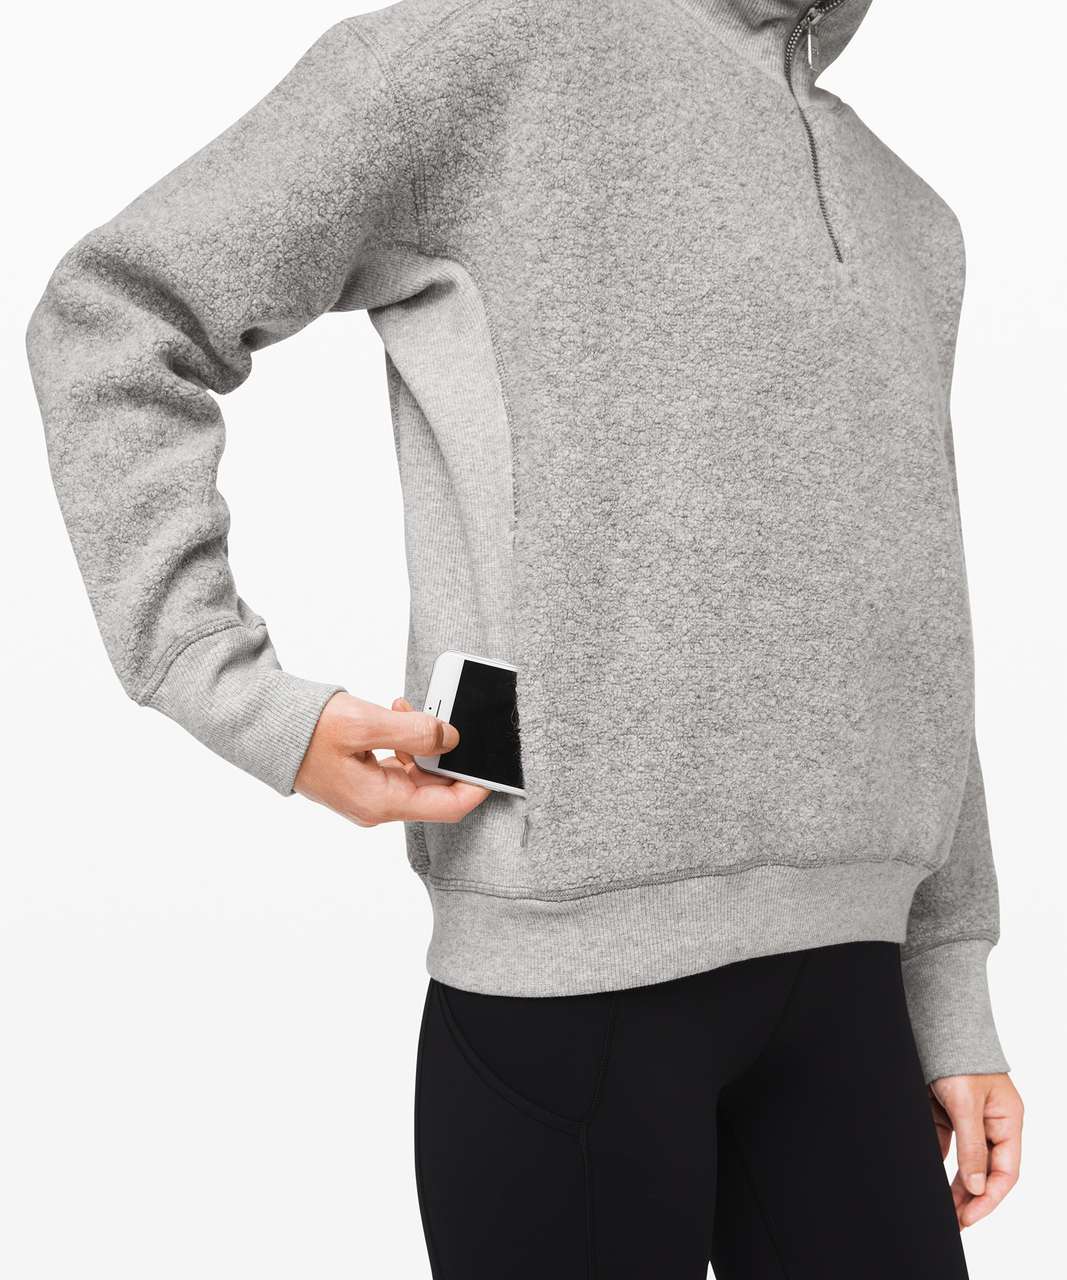 Lululemon Stand Out Sherpa 1/2 Zip - Heathered Silver Spoon / Heathered Core Light Grey